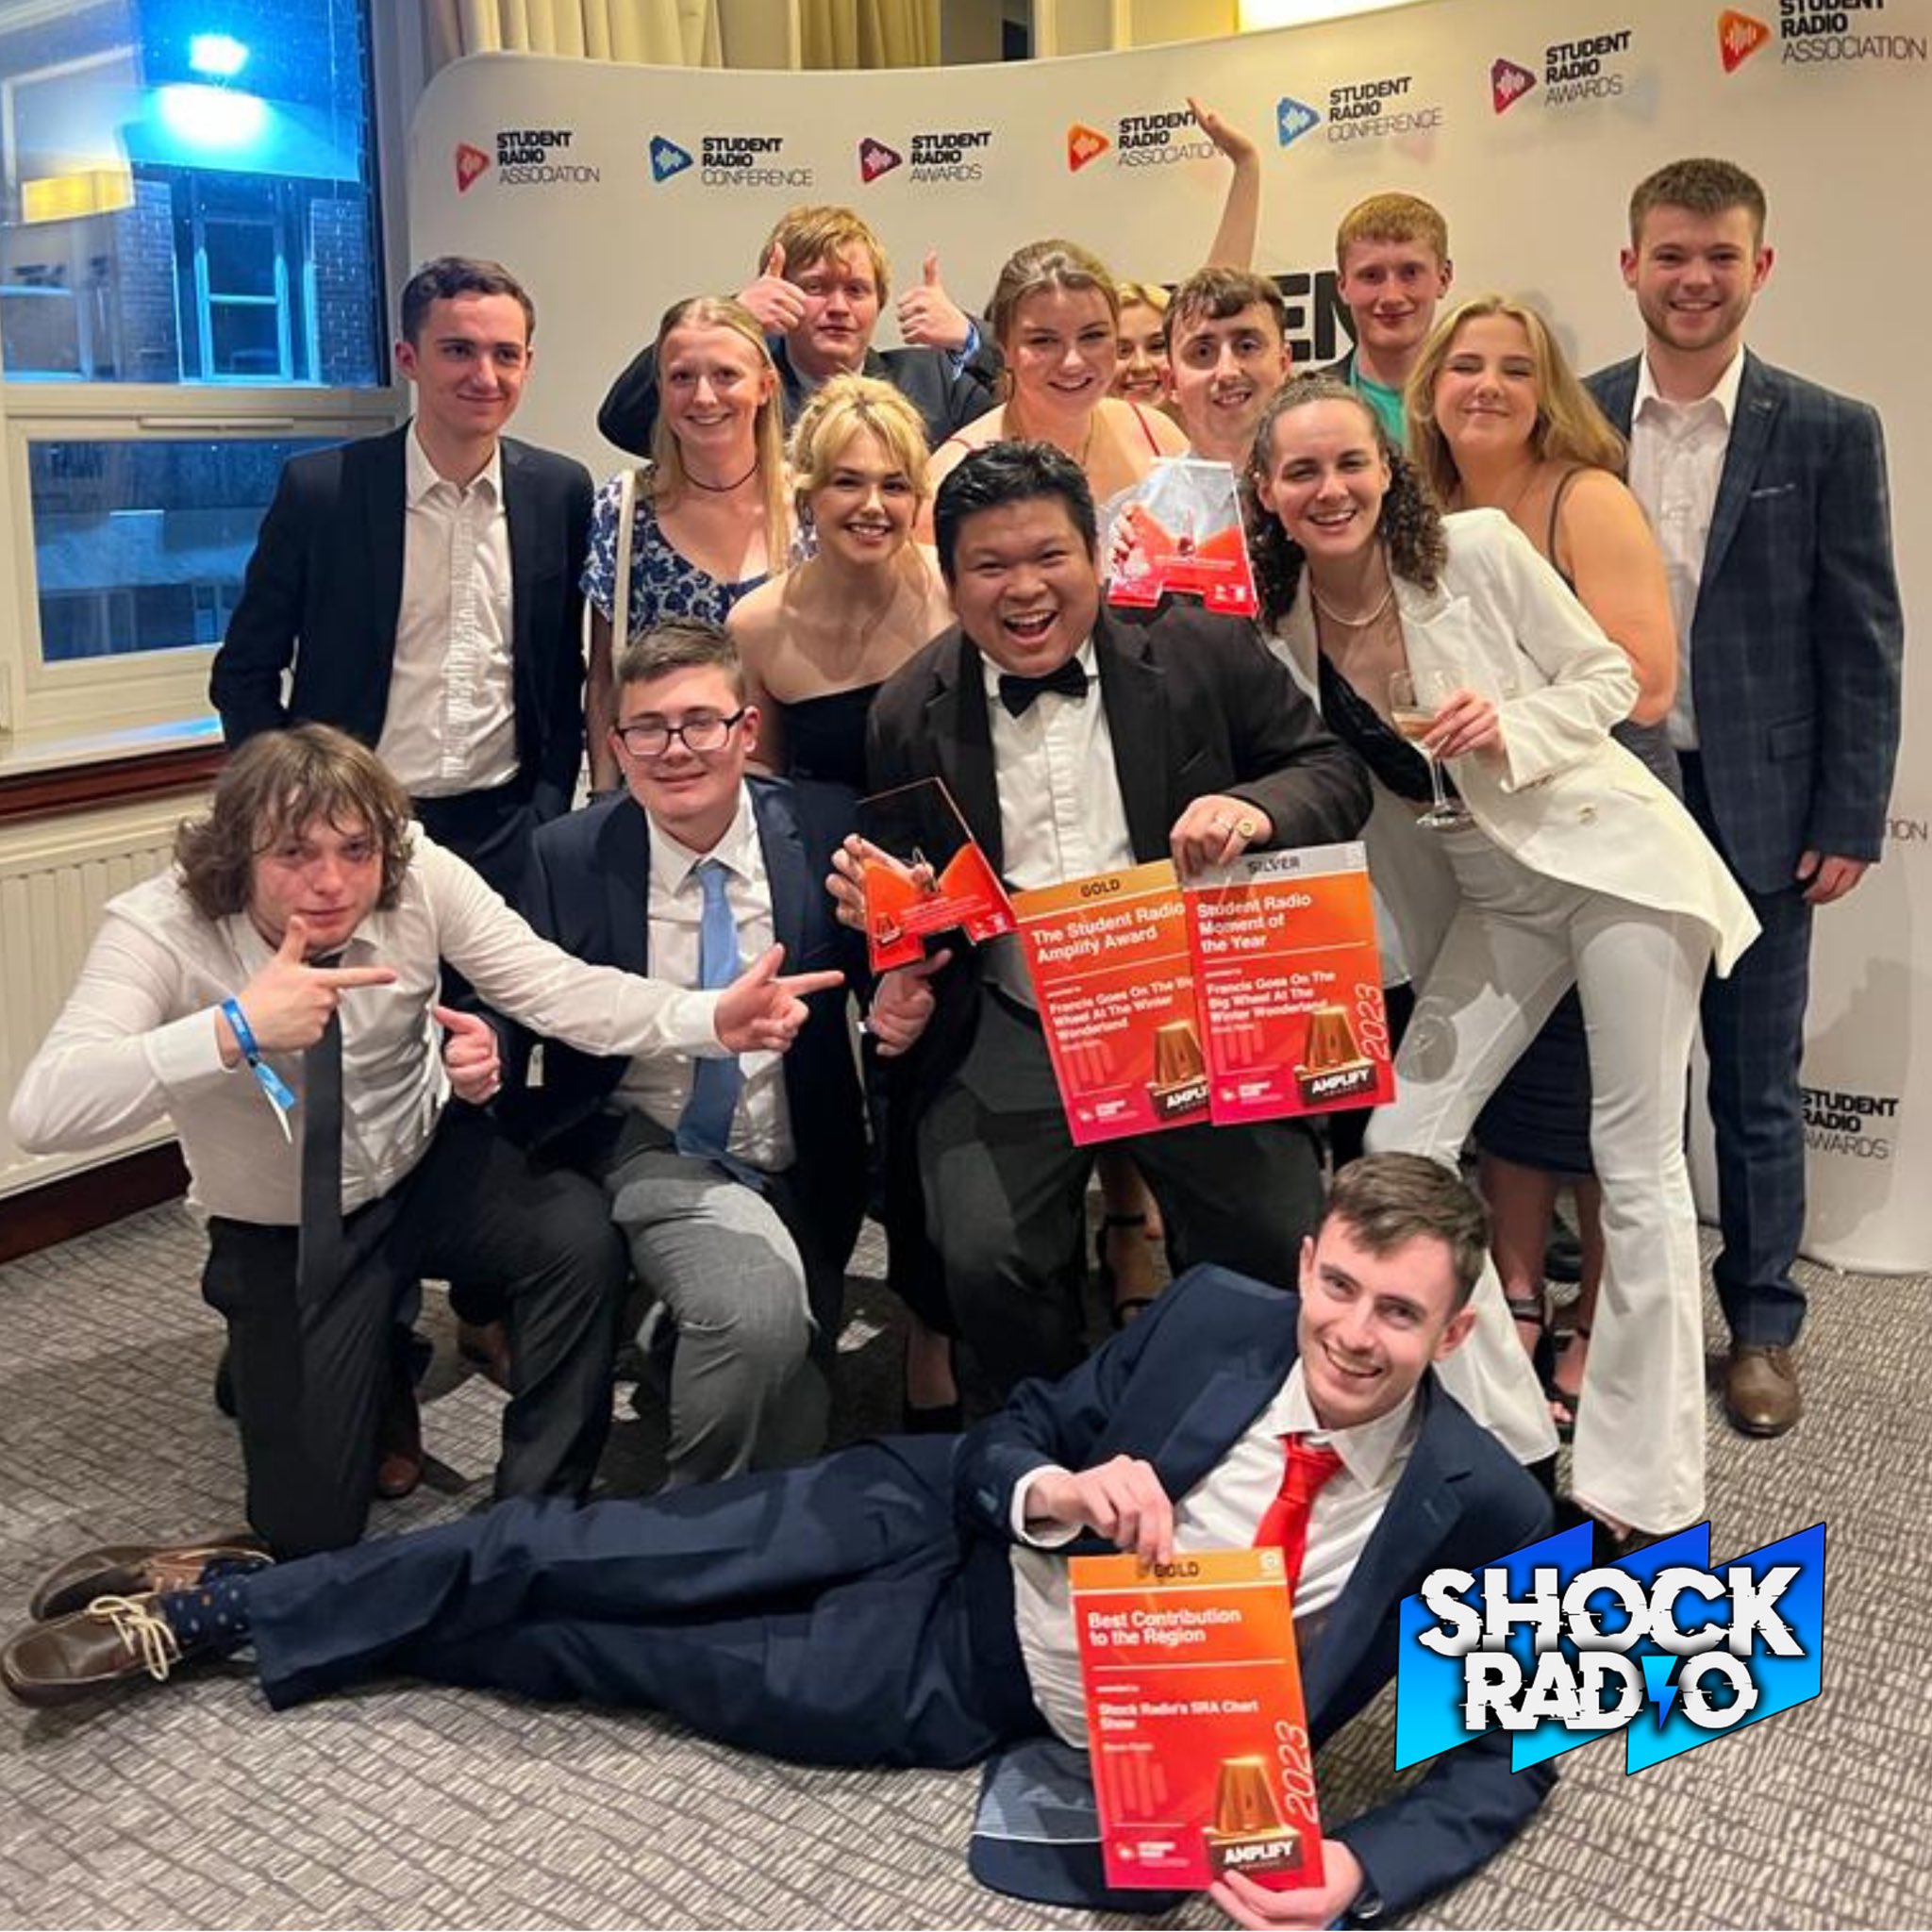 Shock Radio team celebrating after their win at the SRA Amplify awards.